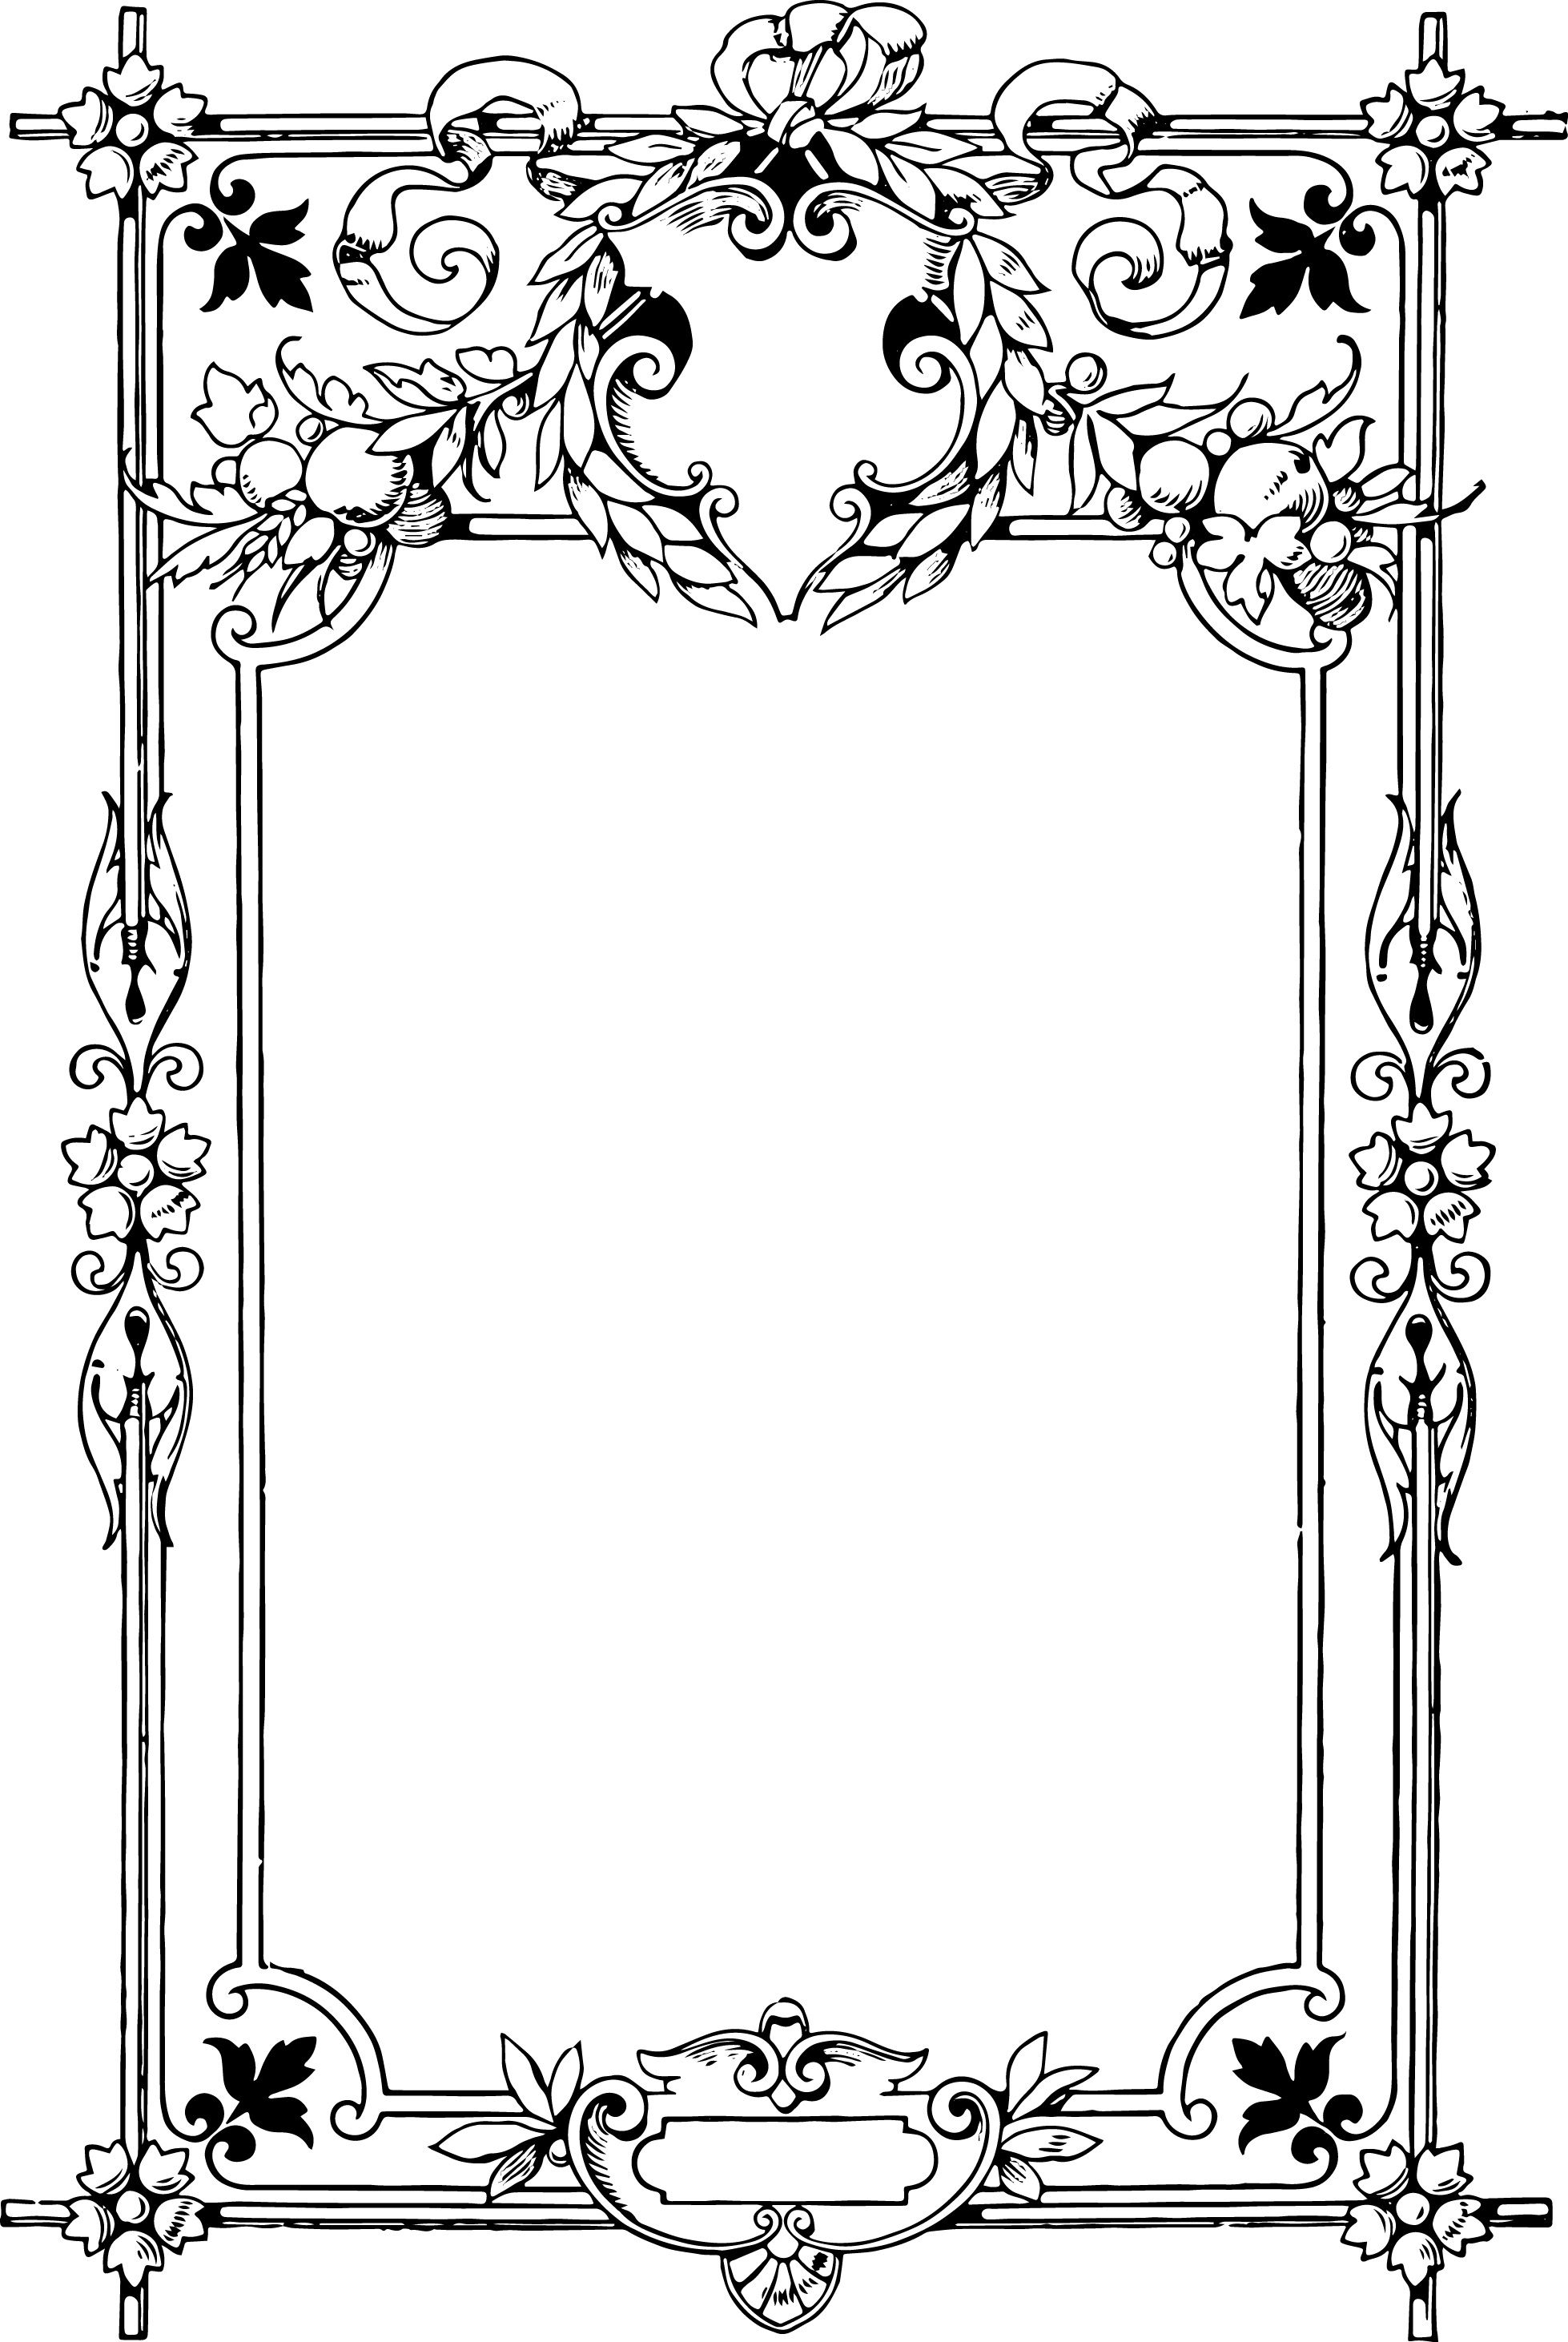 Banner clipart victorian. Vintage graphics and printables